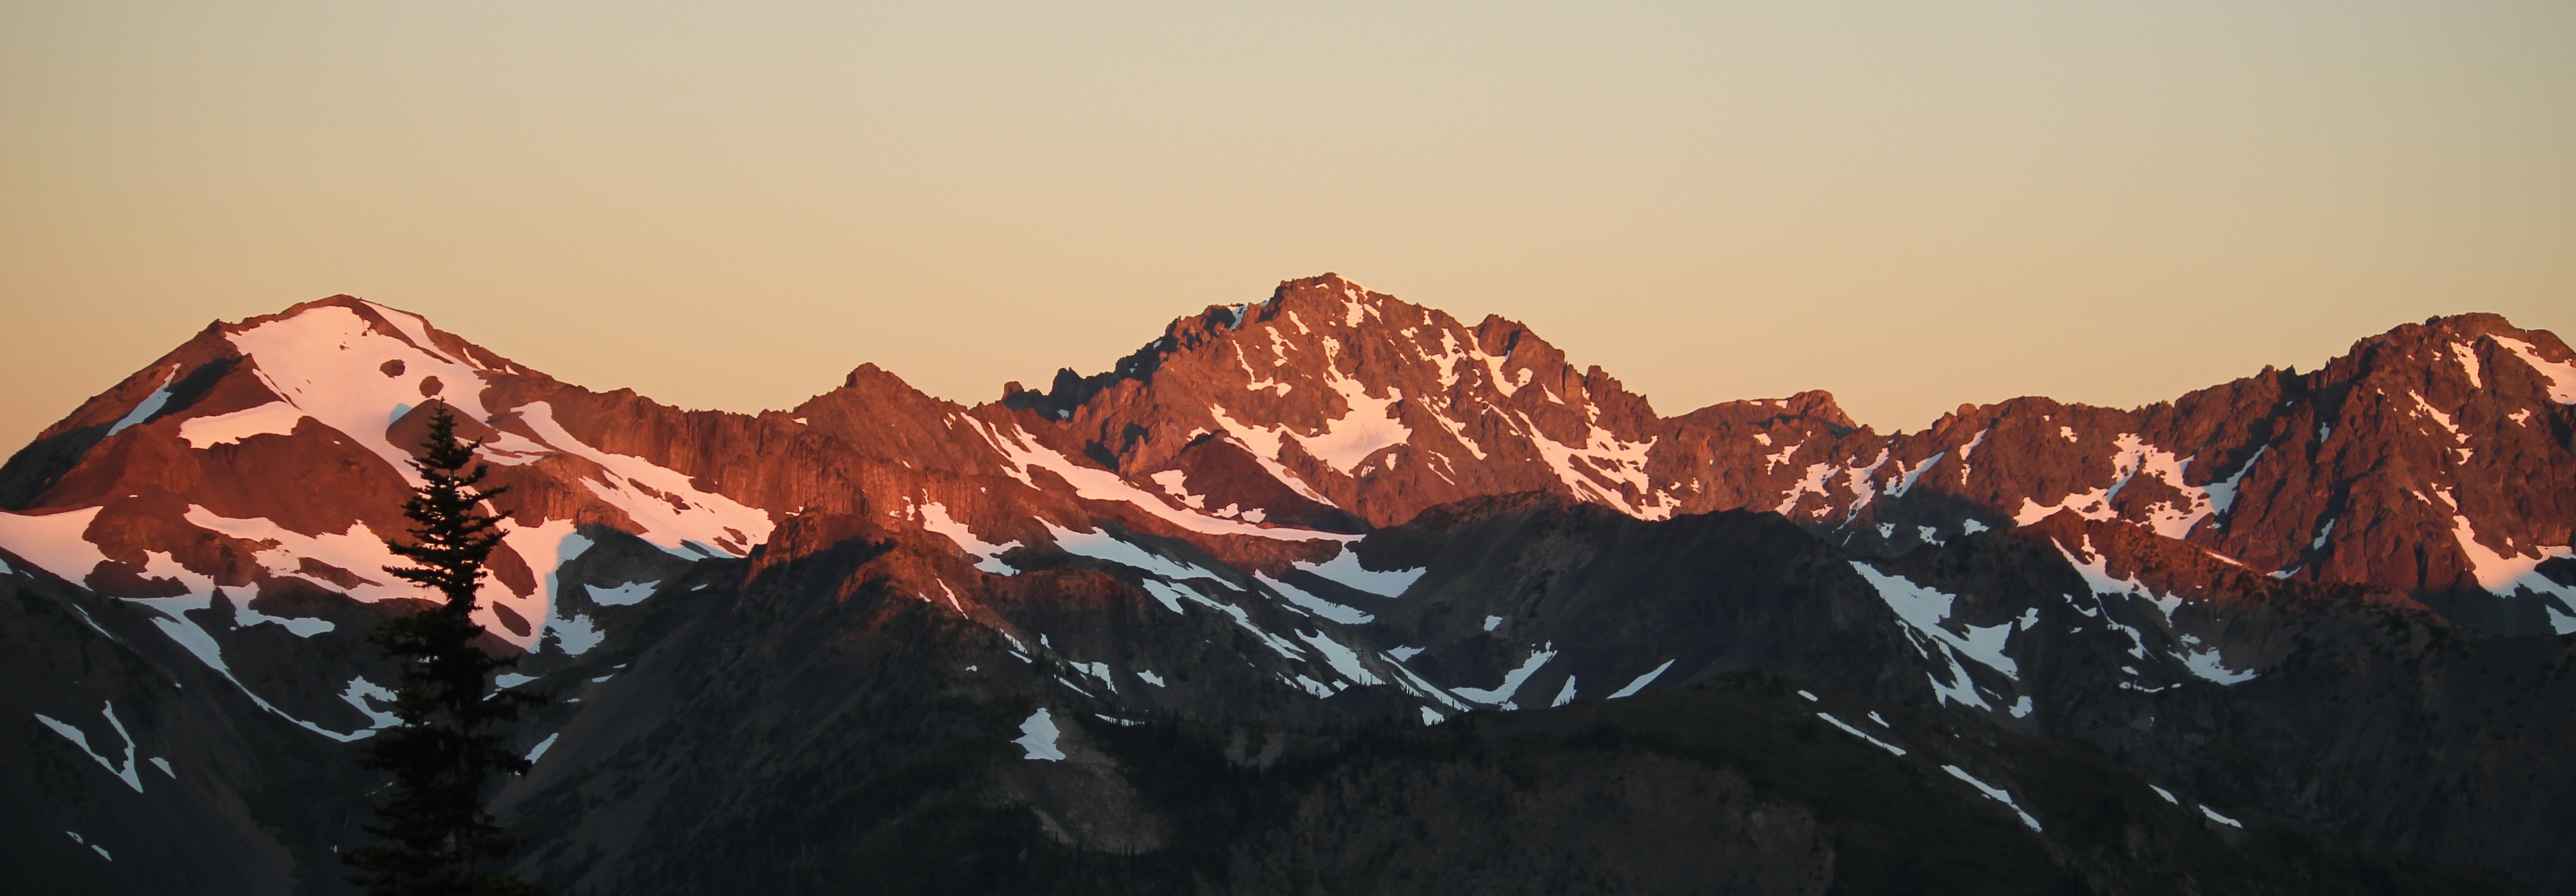 Jagged, snow capped peaks at sunset